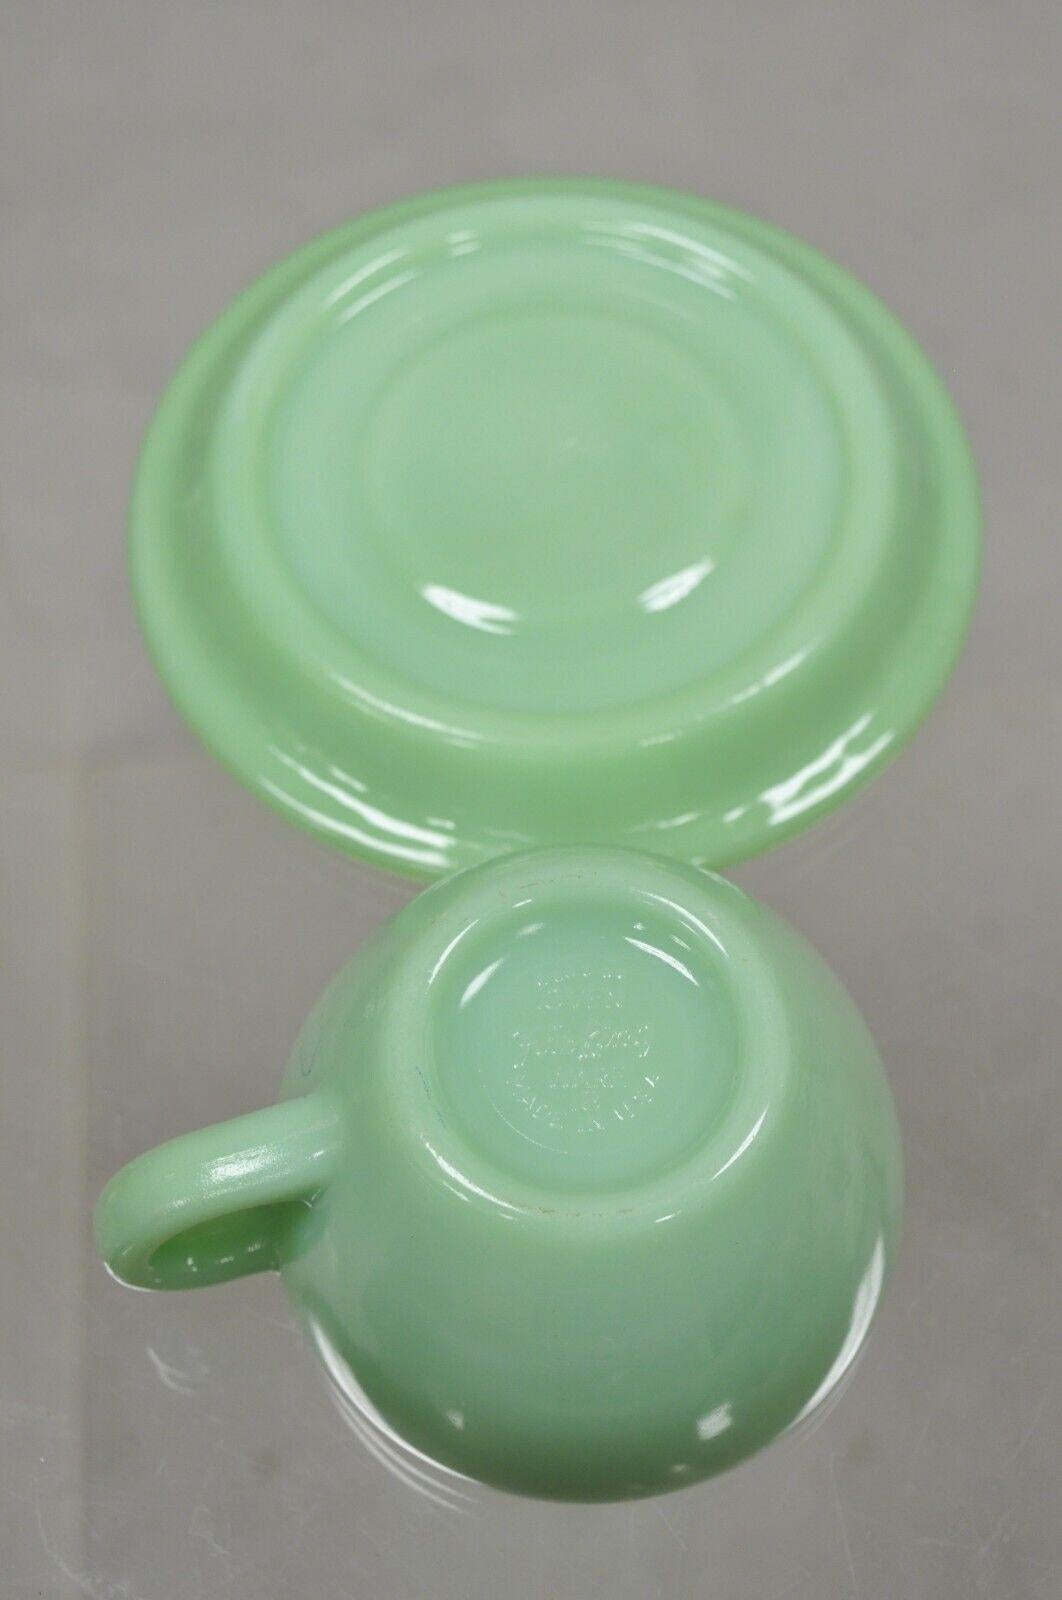 20th Century Vintage Fire King Jadeite Green Oven Ware Coffee Cup and Saucer with Damage